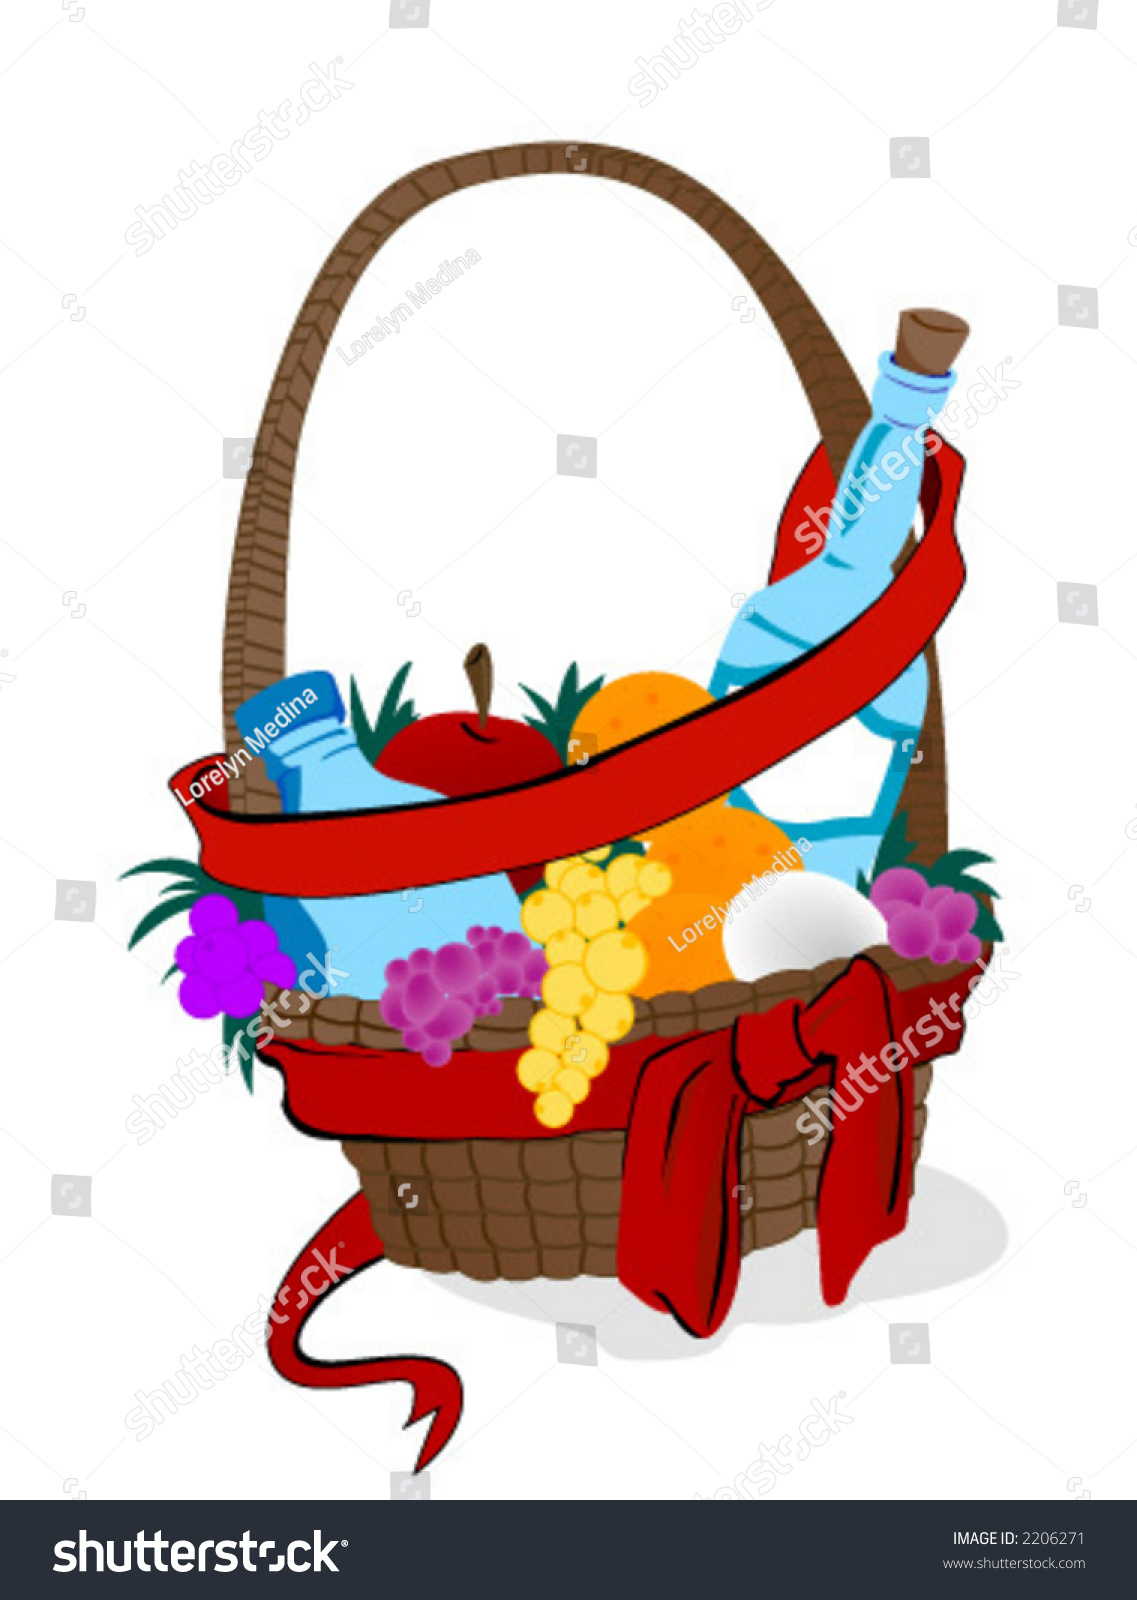 clipart gift baskets - photo #25